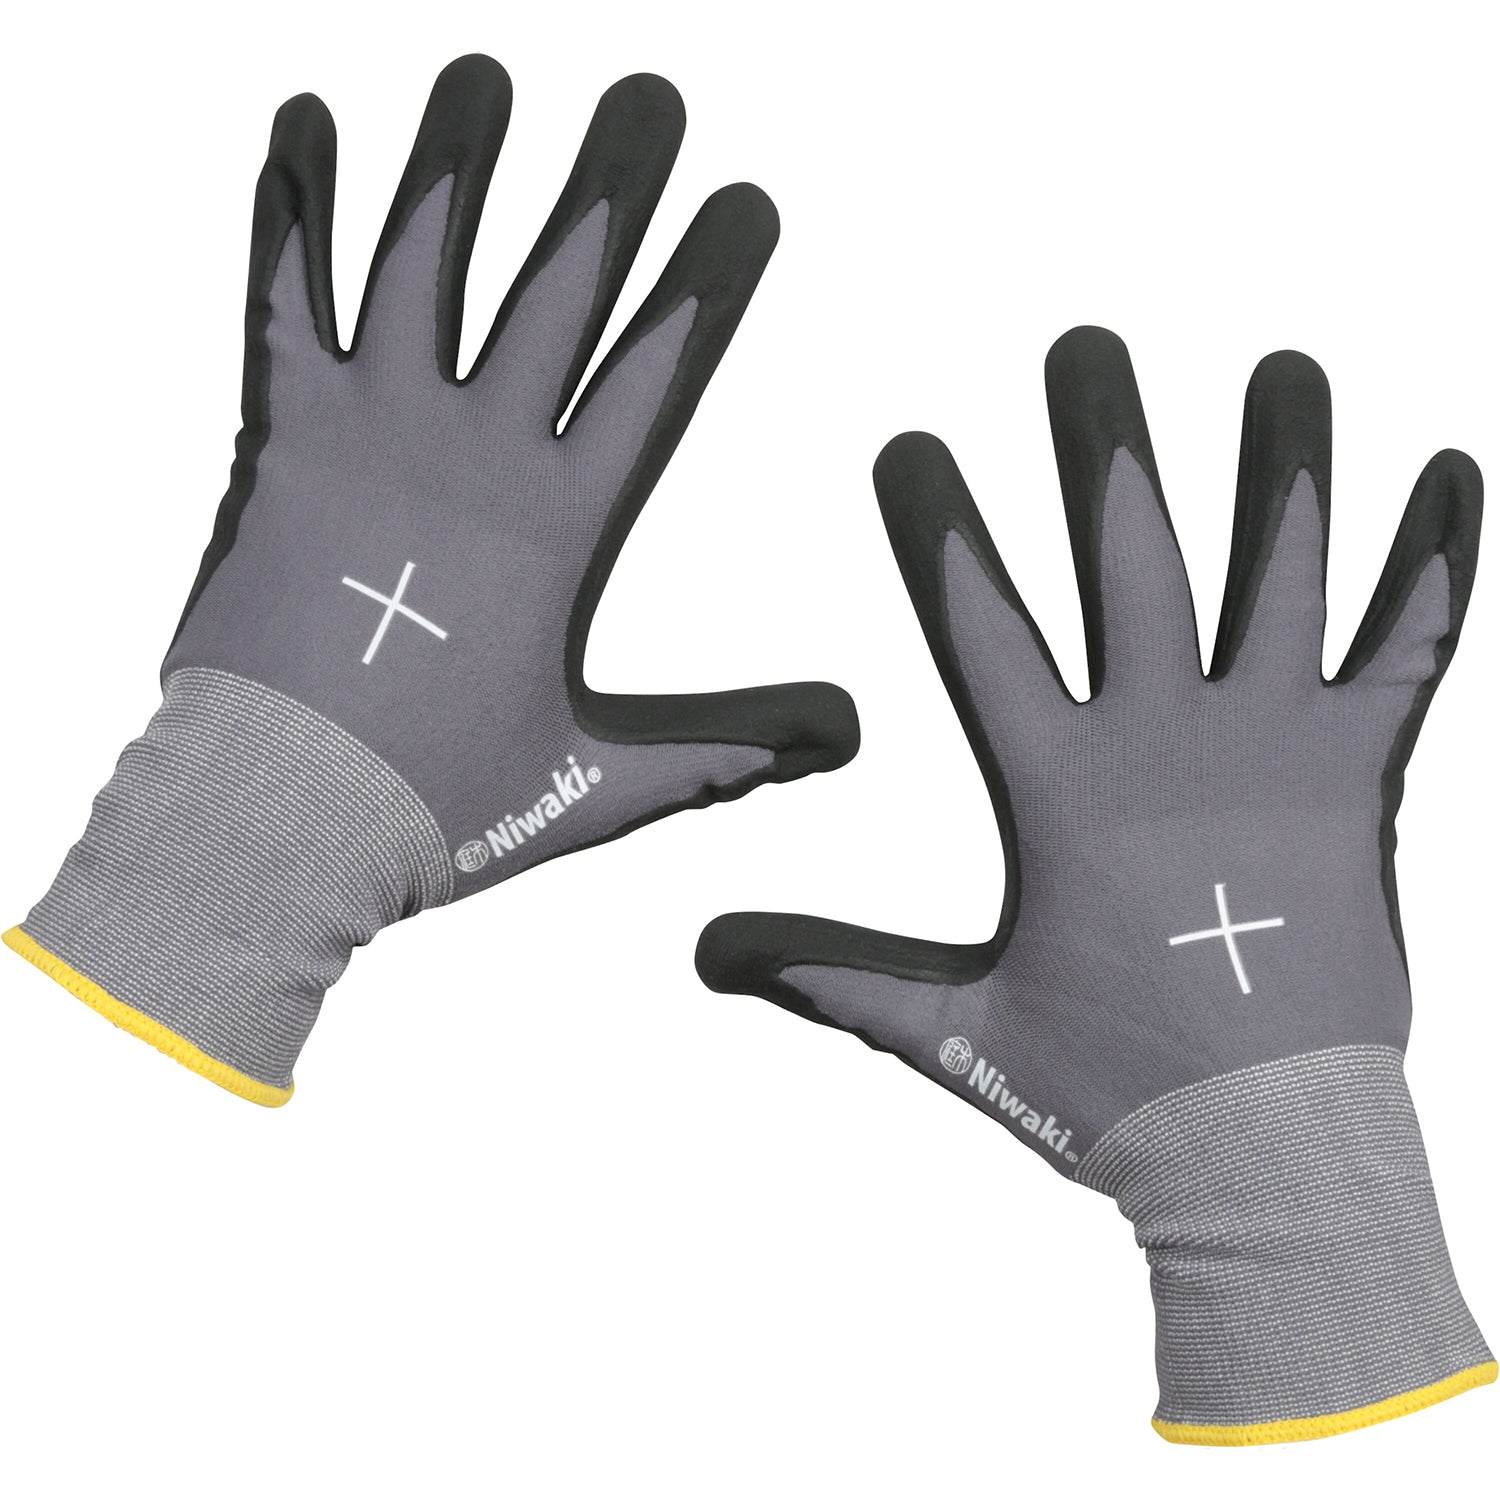 Gardening Gloves - Extra Large with Yellow Cuff